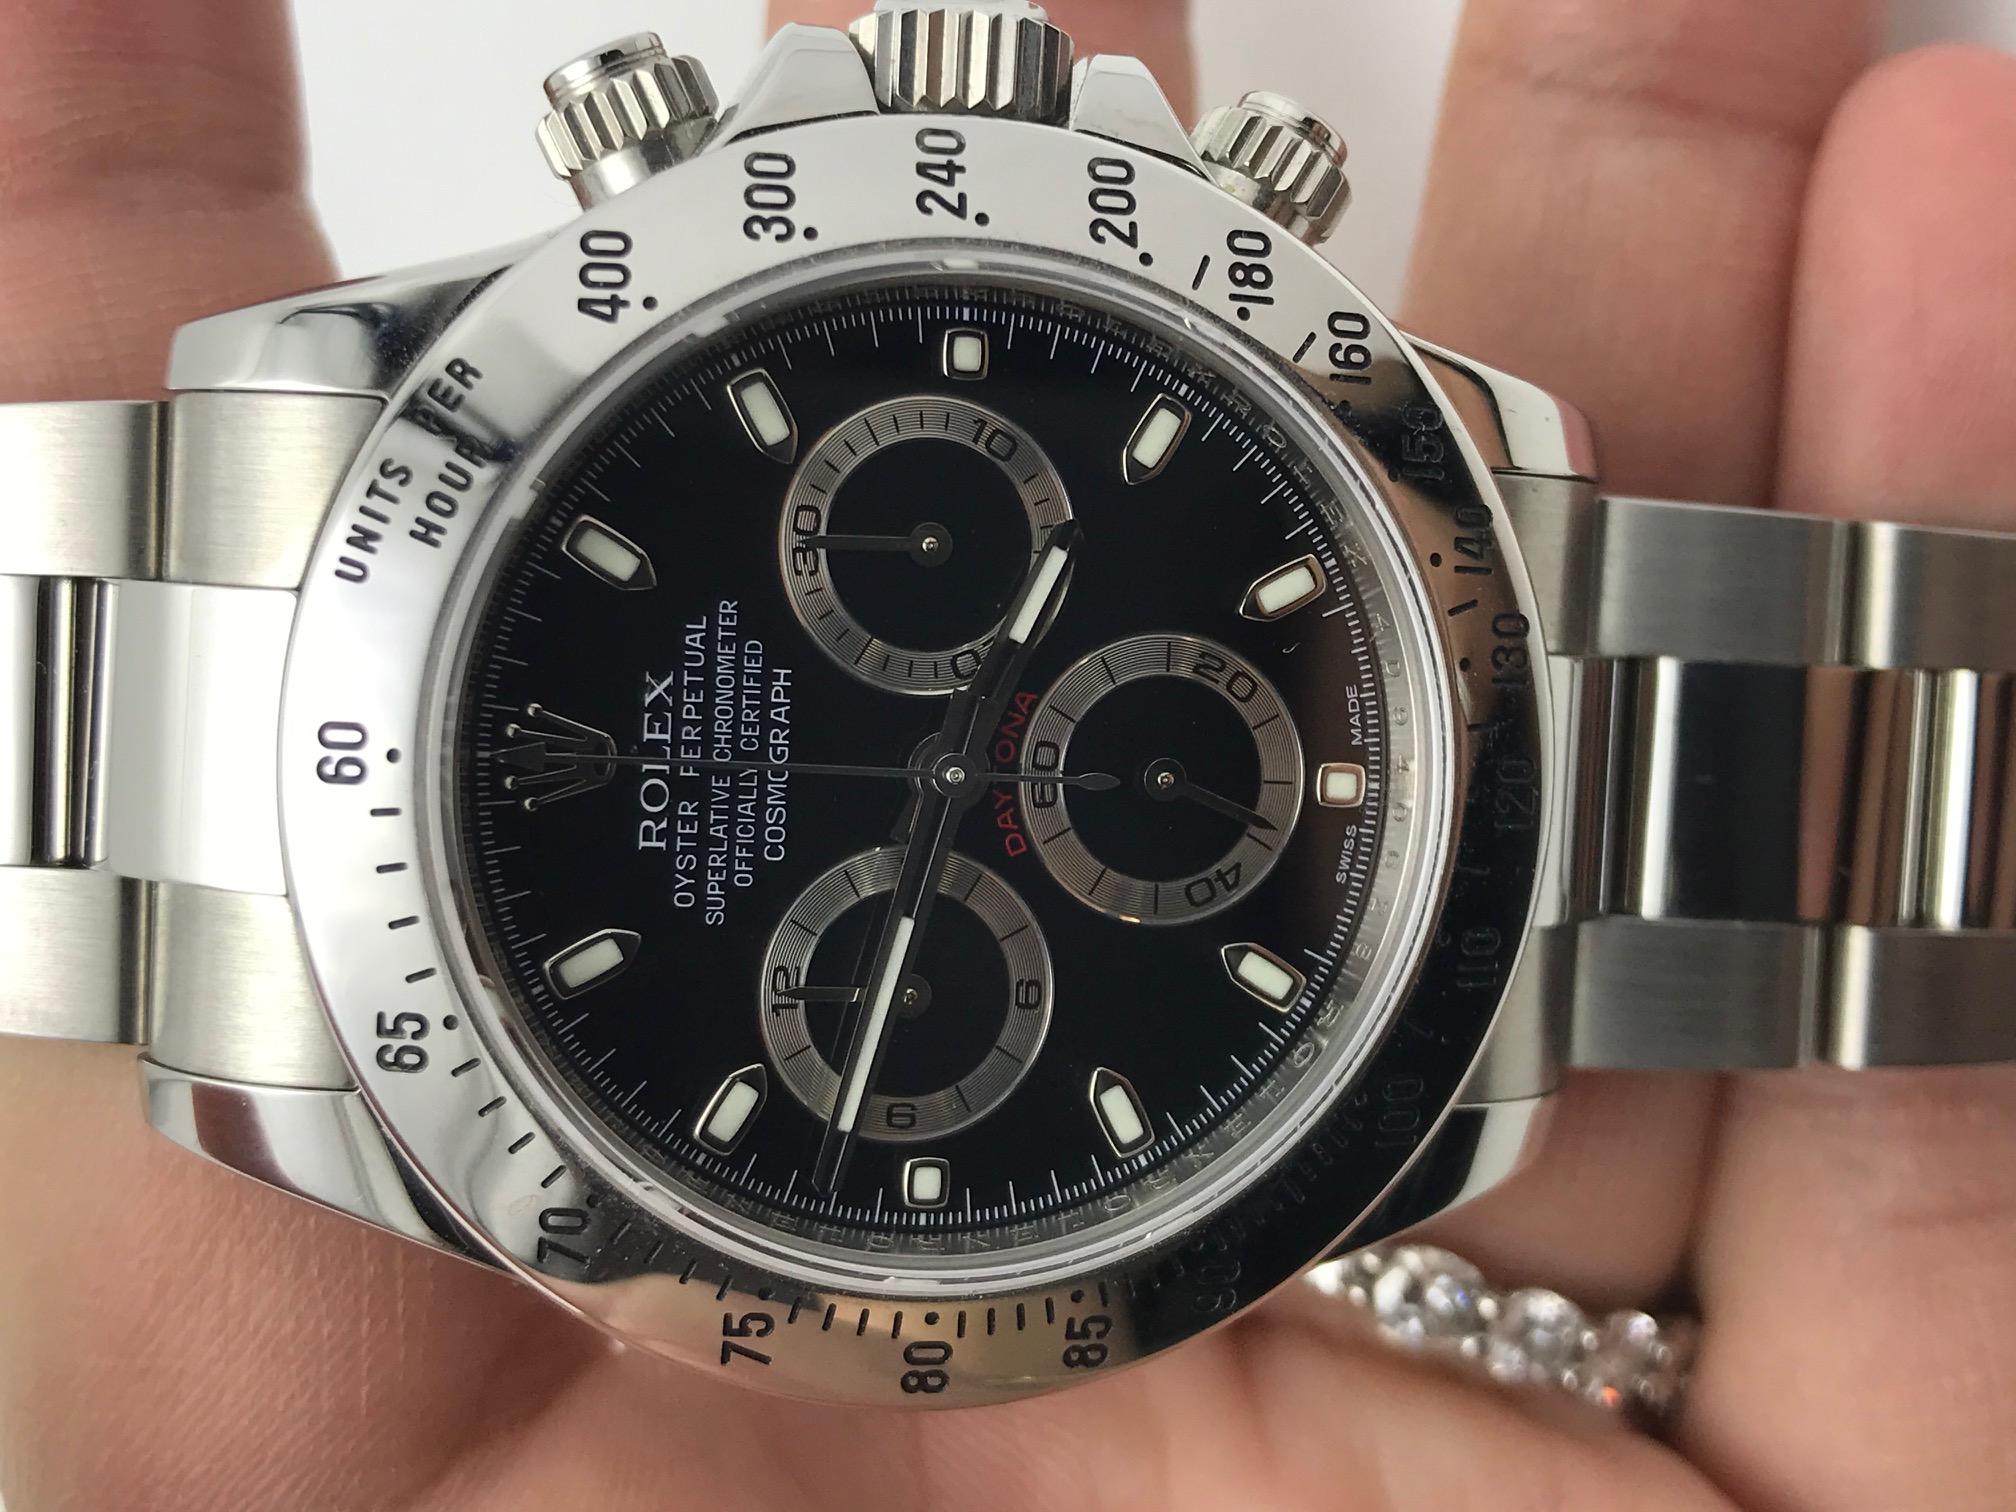 Rolex Daytona 116520 Black Dial Stainless Steel Box and Papers, 2010 3